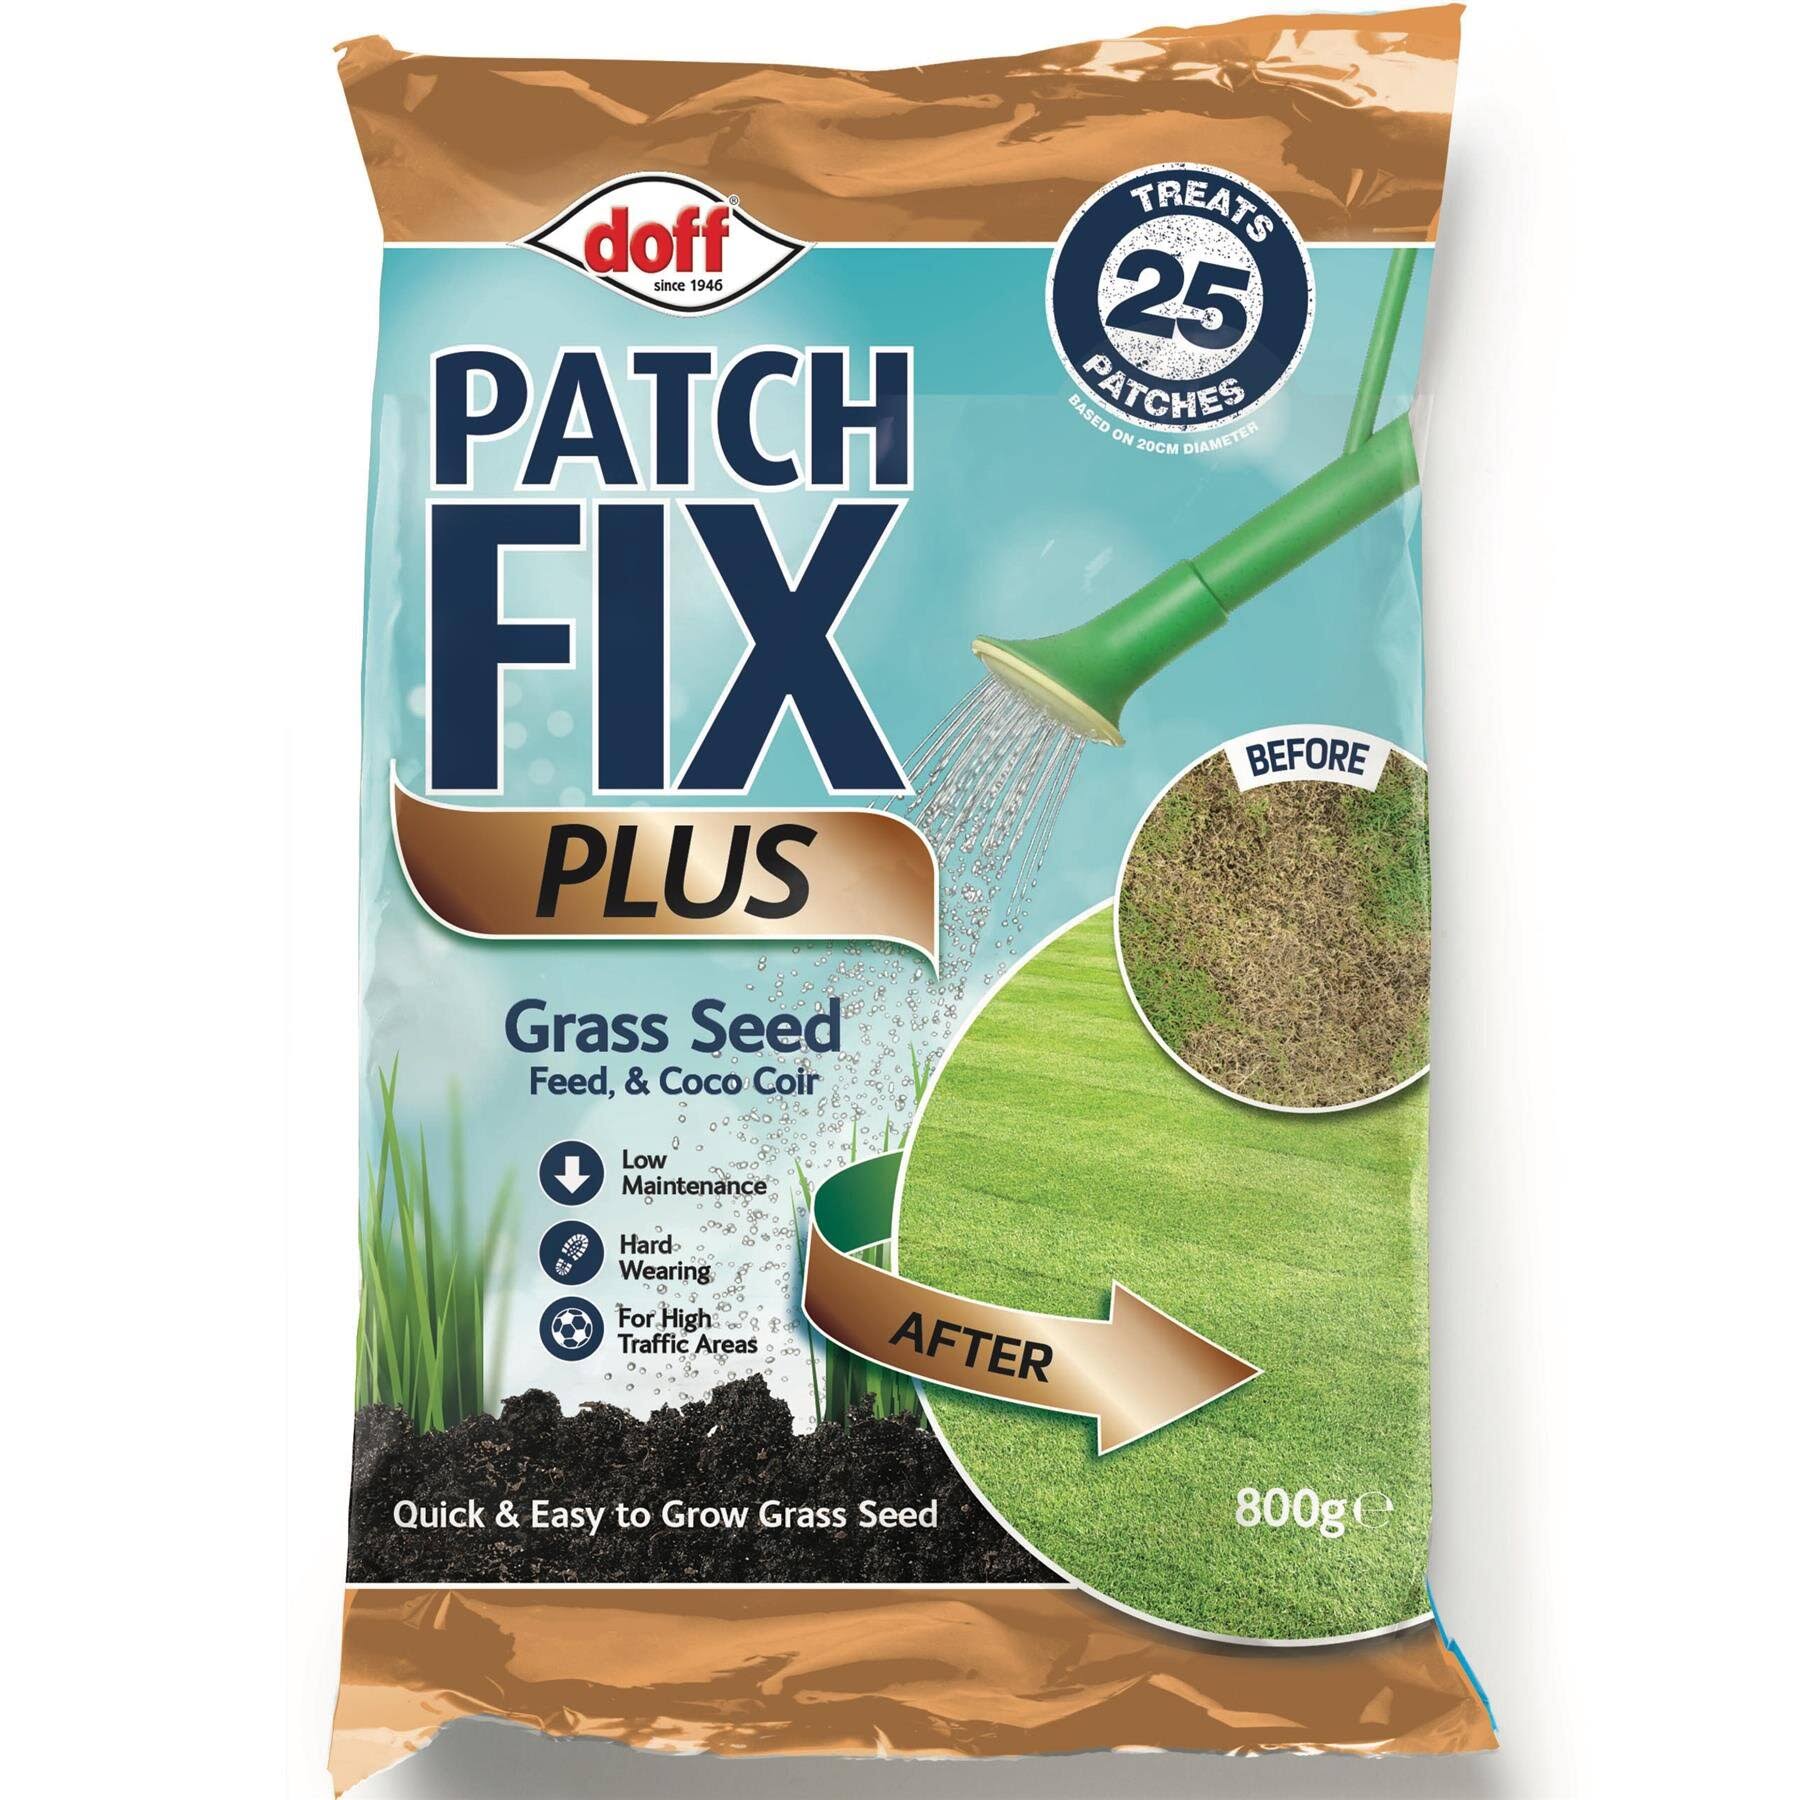 Doff Patch Fix Plus Grass Seed Feed & Coco Coir - 800g